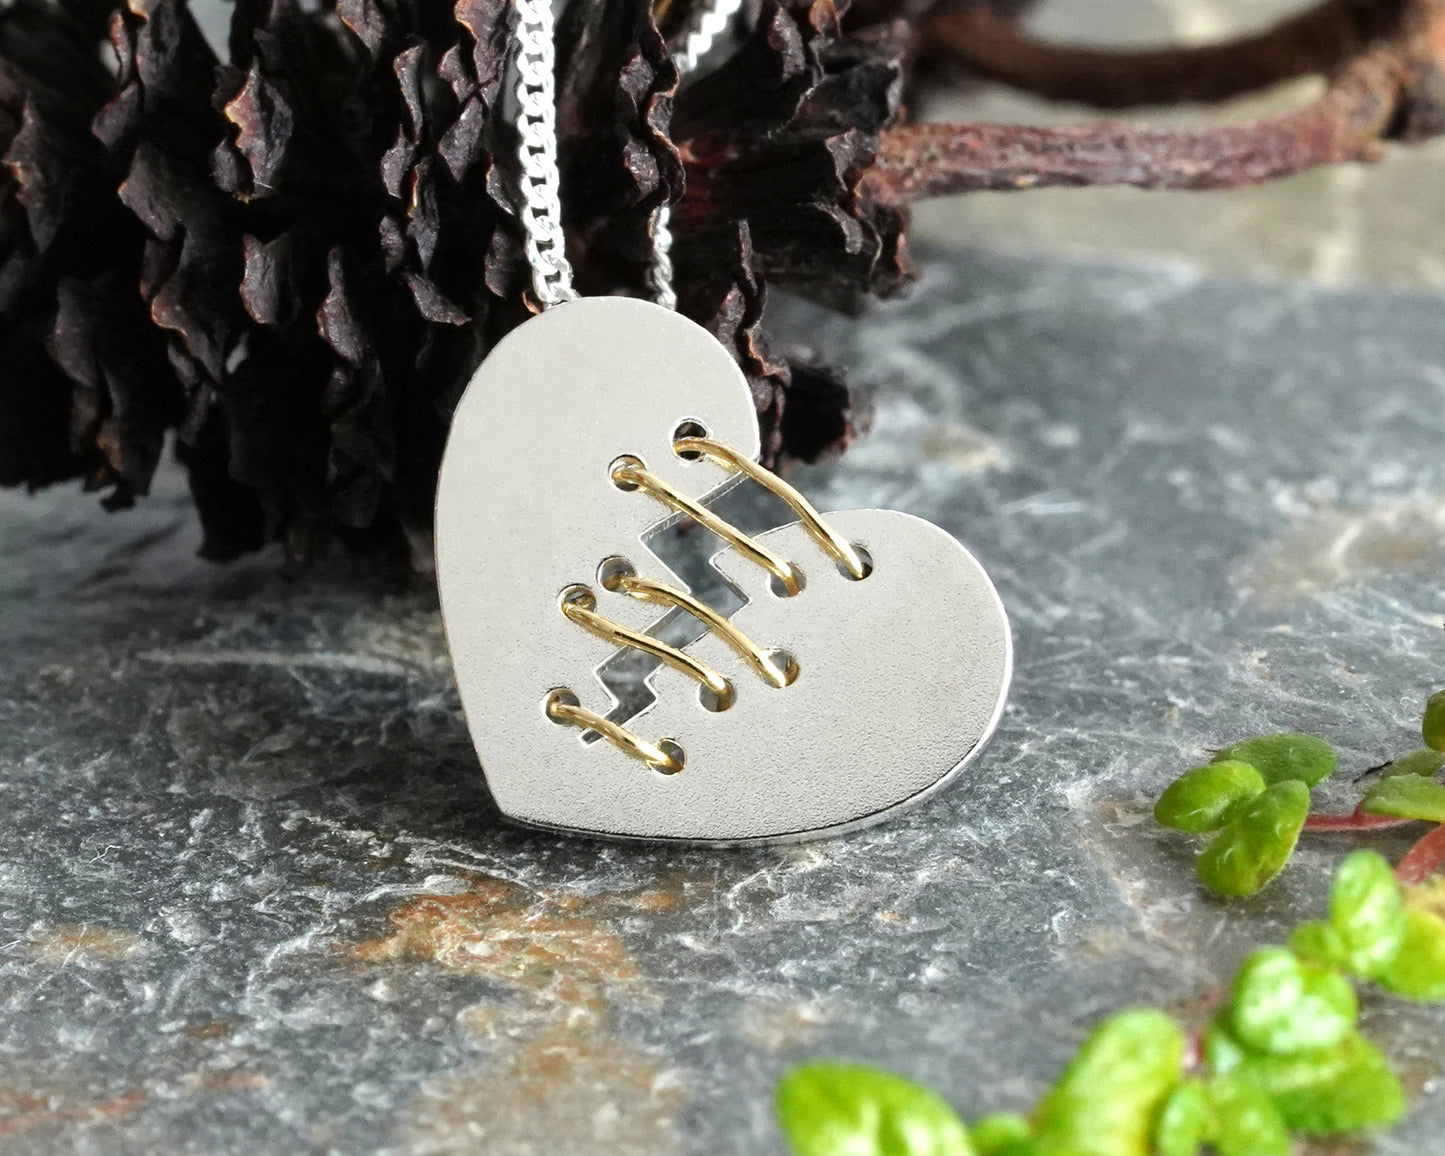 Mended Heart Necklace with Silver Sutures, Stitched Silver Heart Shape Necklace